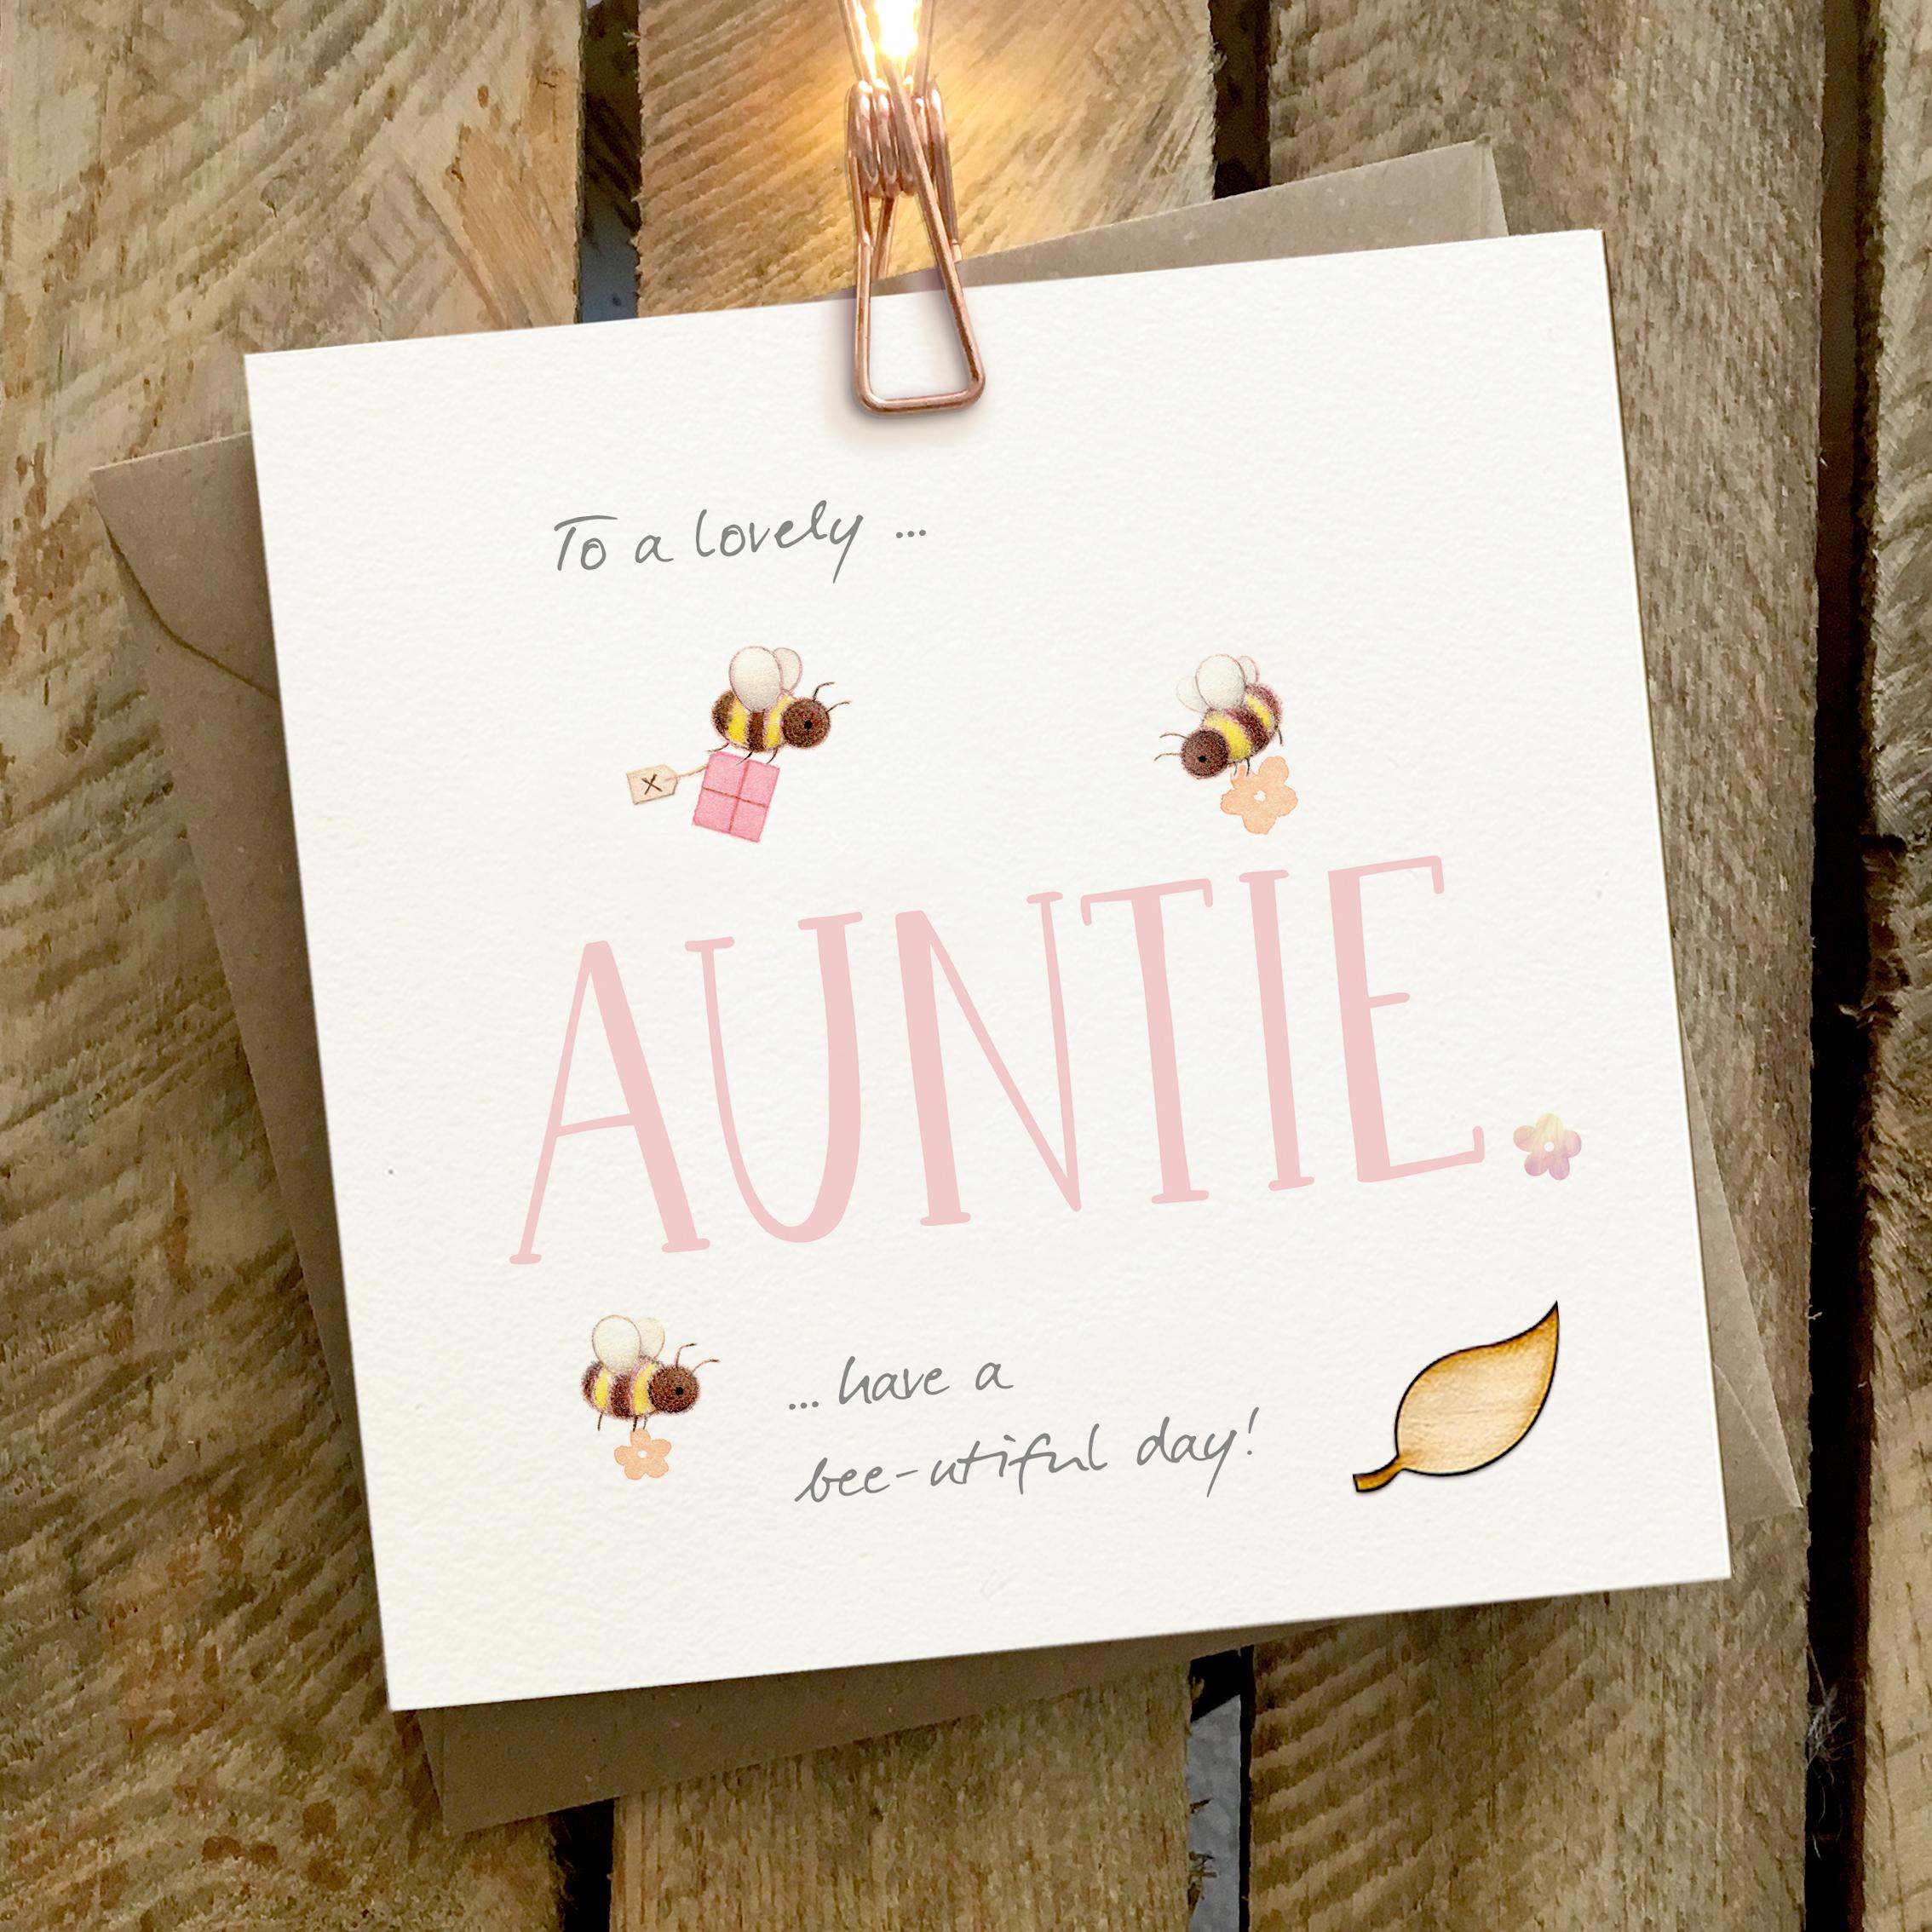 Card featuring bees carrying presents and flying around a large AUNTIE caption